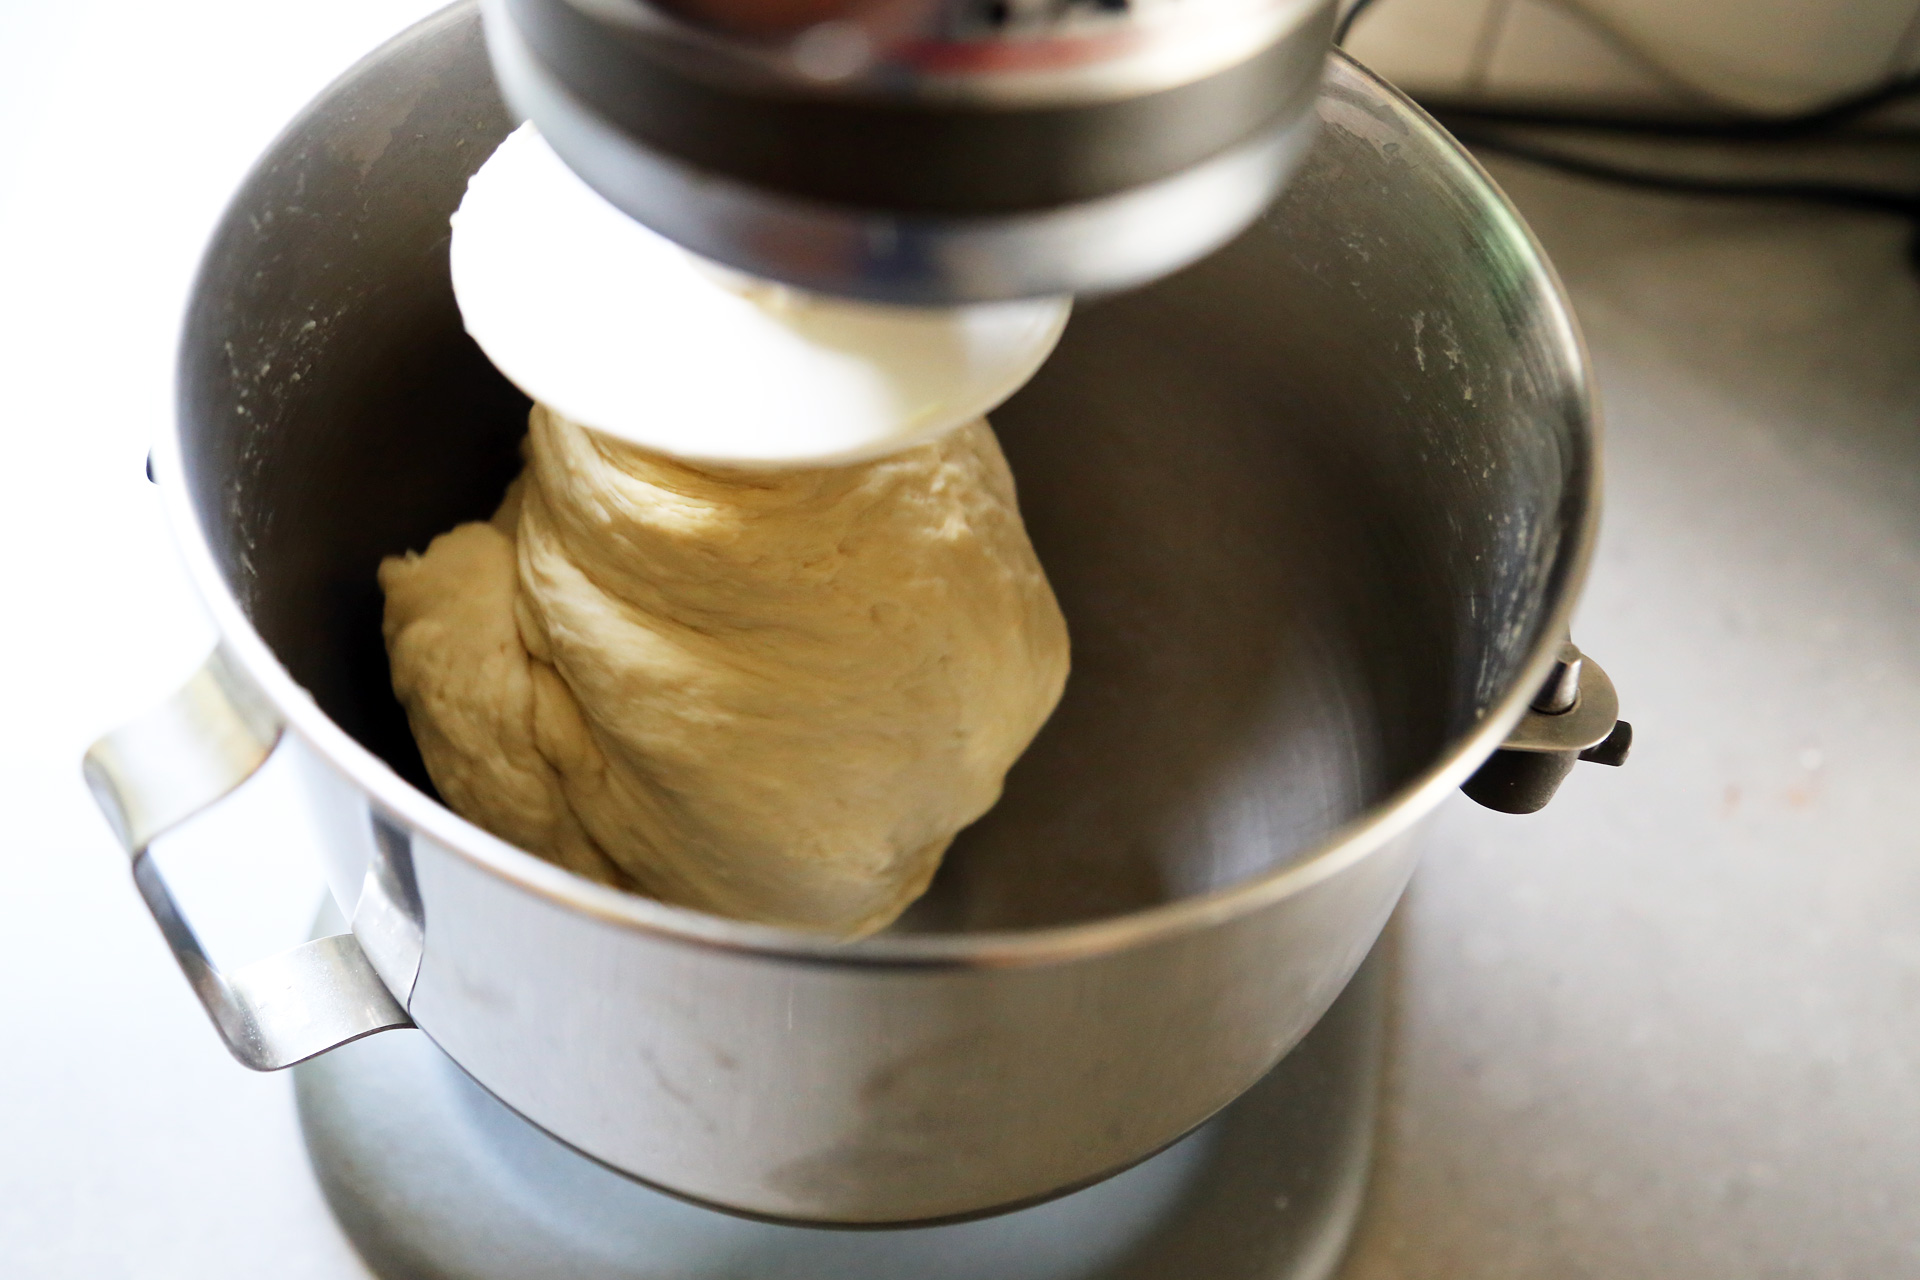 Increase the speed to medium and knead for 8 to 10 minutes, until the dough softens and looks smooth and soft.